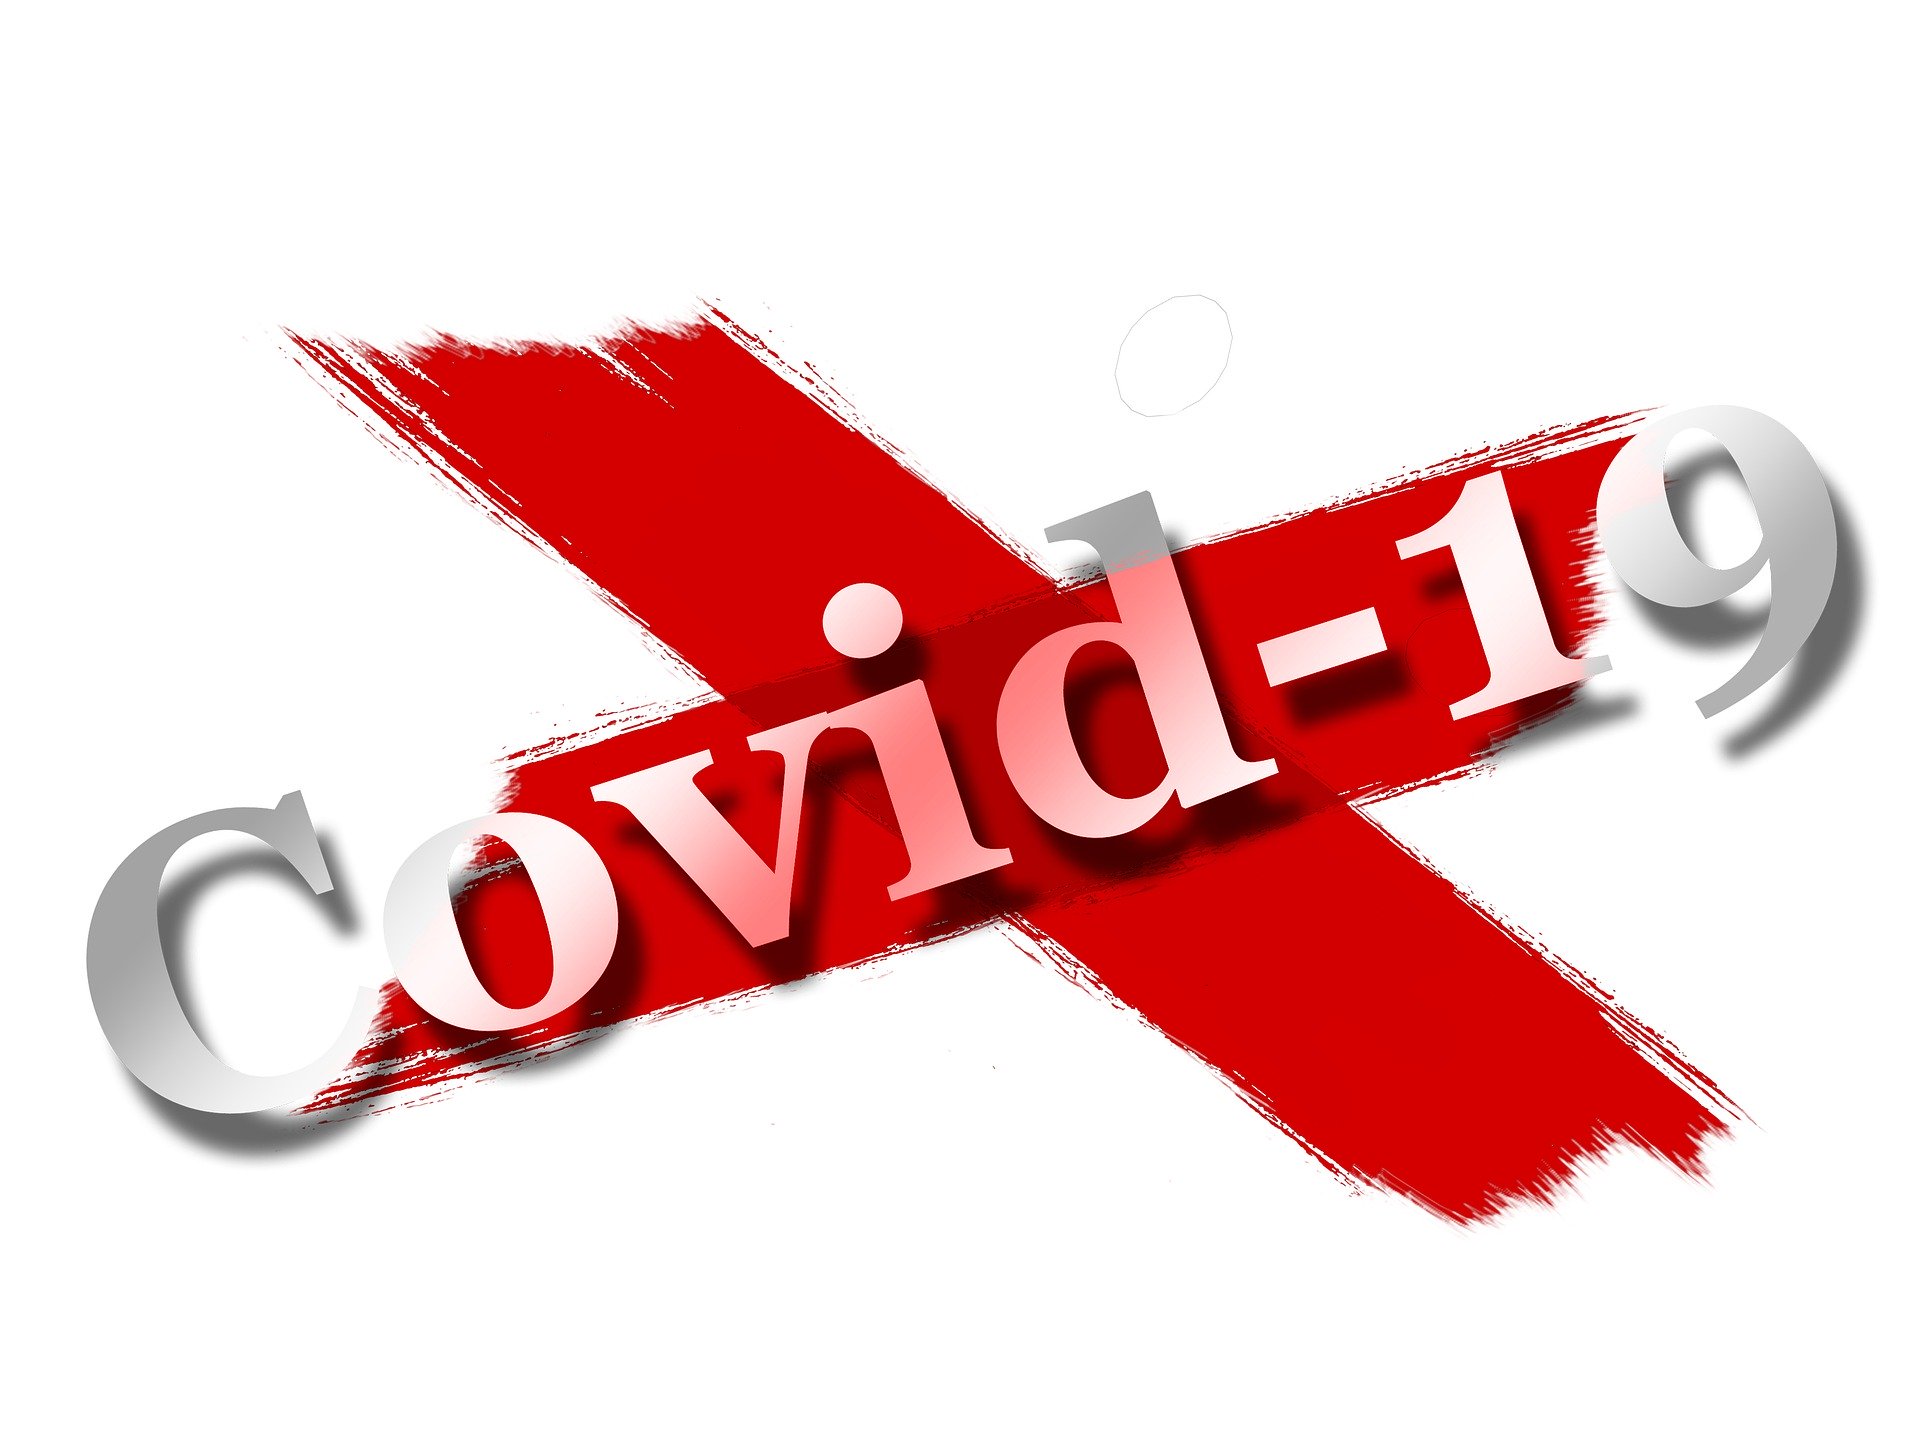 Covid-19 words on a red x